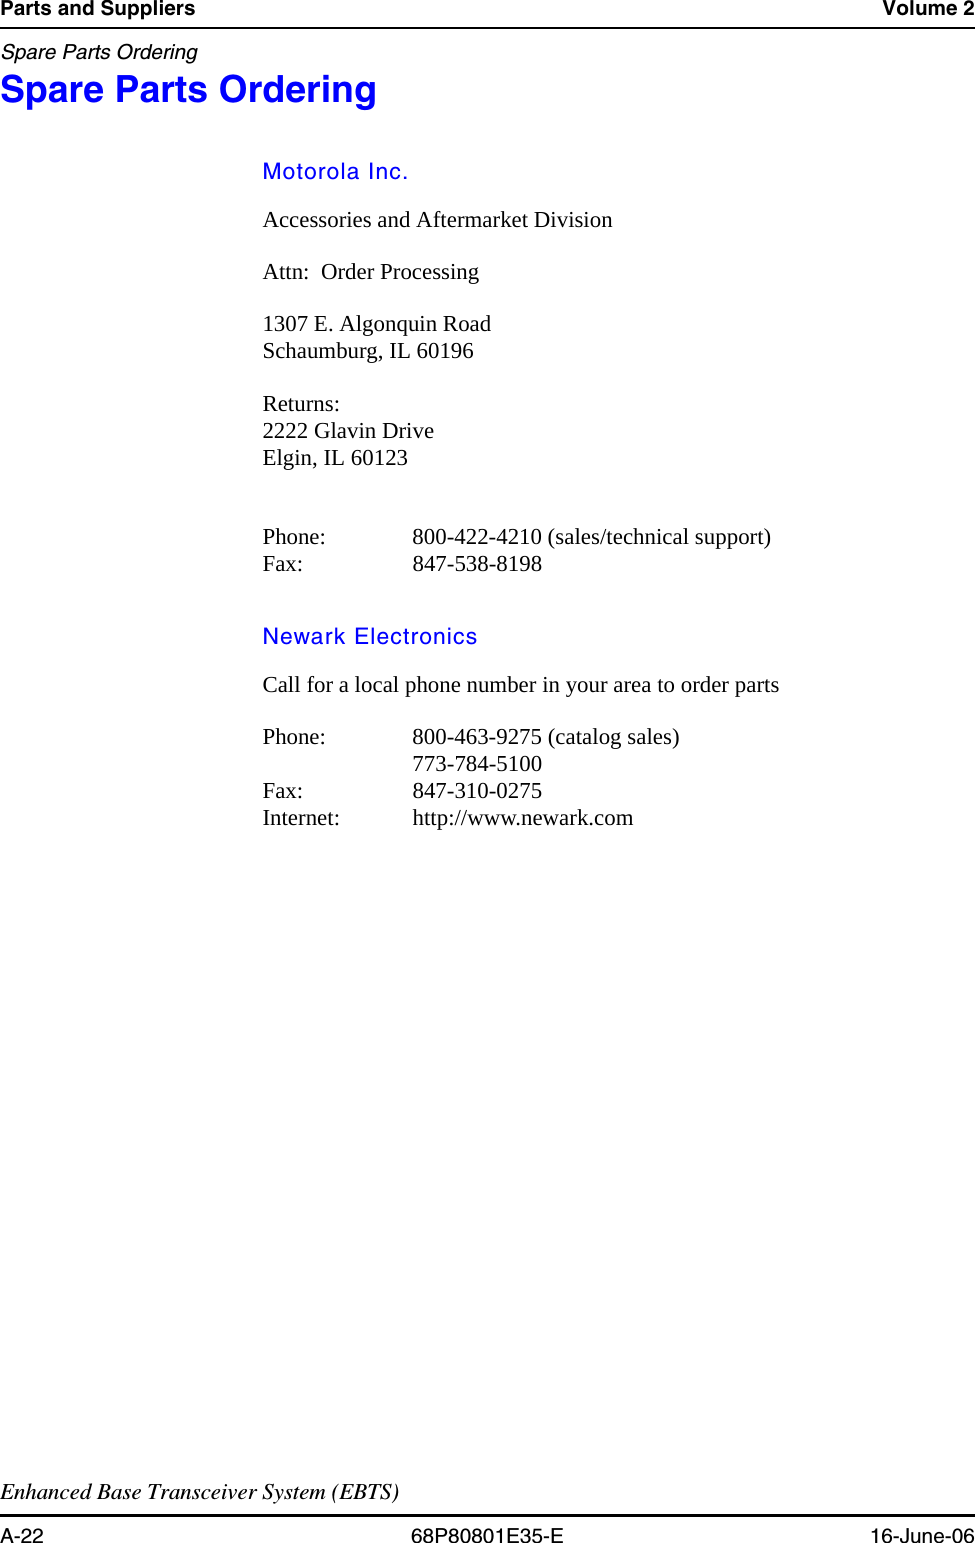 Parts and Suppliers Volume 2Spare Parts OrderingEnhanced Base Transceiver System (EBTS)A-22 68P80801E35-E 16-June-06Spare Parts Ordering 8Motorola Inc.Accessories and Aftermarket DivisionAttn:  Order Processing1307 E. Algonquin RoadSchaumburg, IL 60196Returns:2222 Glavin DriveElgin, IL 60123Phone:   800-422-4210 (sales/technical support)Fax:  847-538-8198Newark ElectronicsCall for a local phone number in your area to order partsPhone: 800-463-9275 (catalog sales)773-784-5100Fax:  847-310-0275Internet:  http://www.newark.com